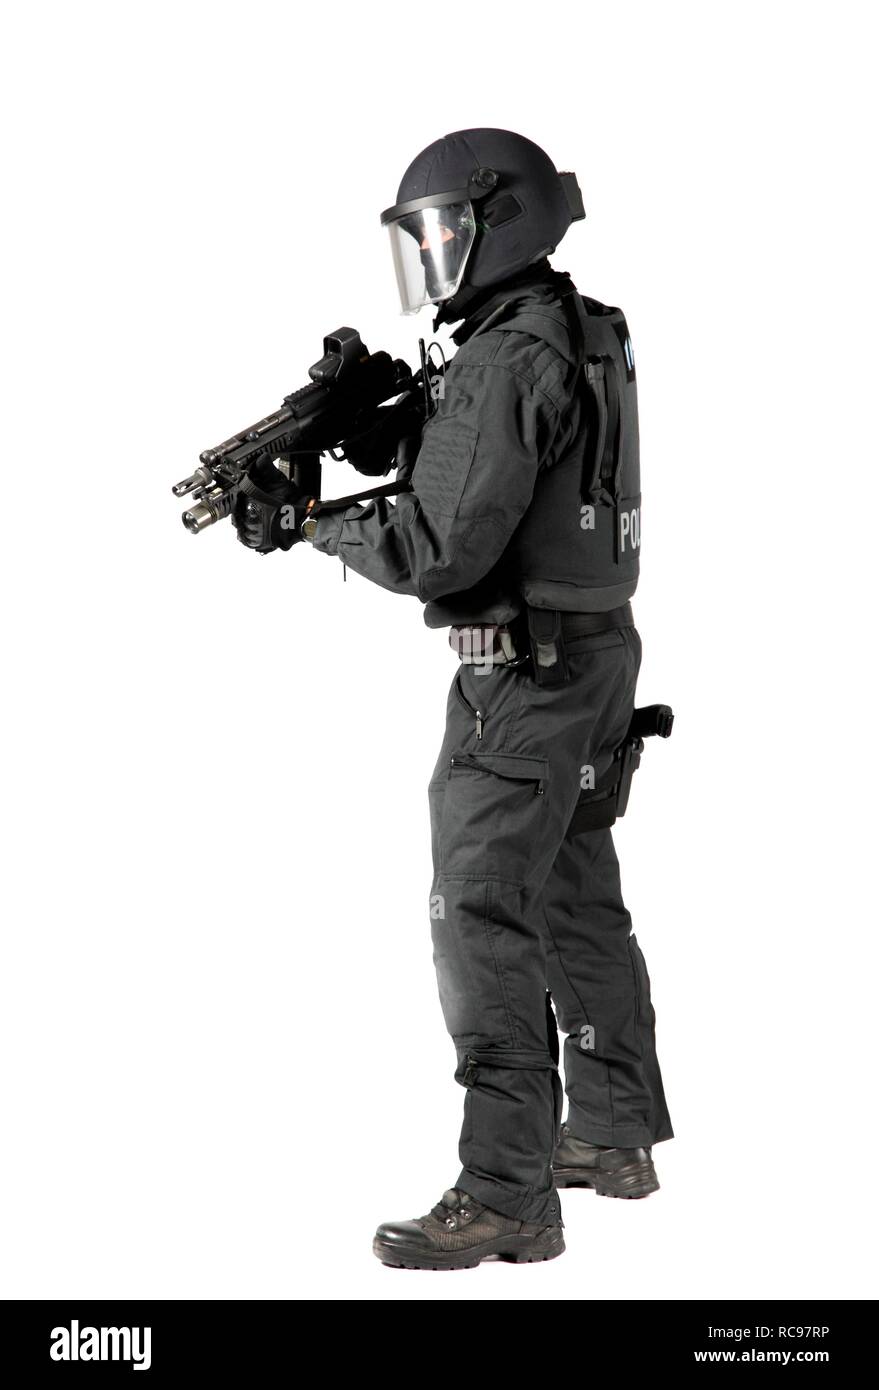 Police, Special Task Force, SEK, officer wearing full protective uniform holding a Heckler & Koch MP5 submachine gun Stock Photo